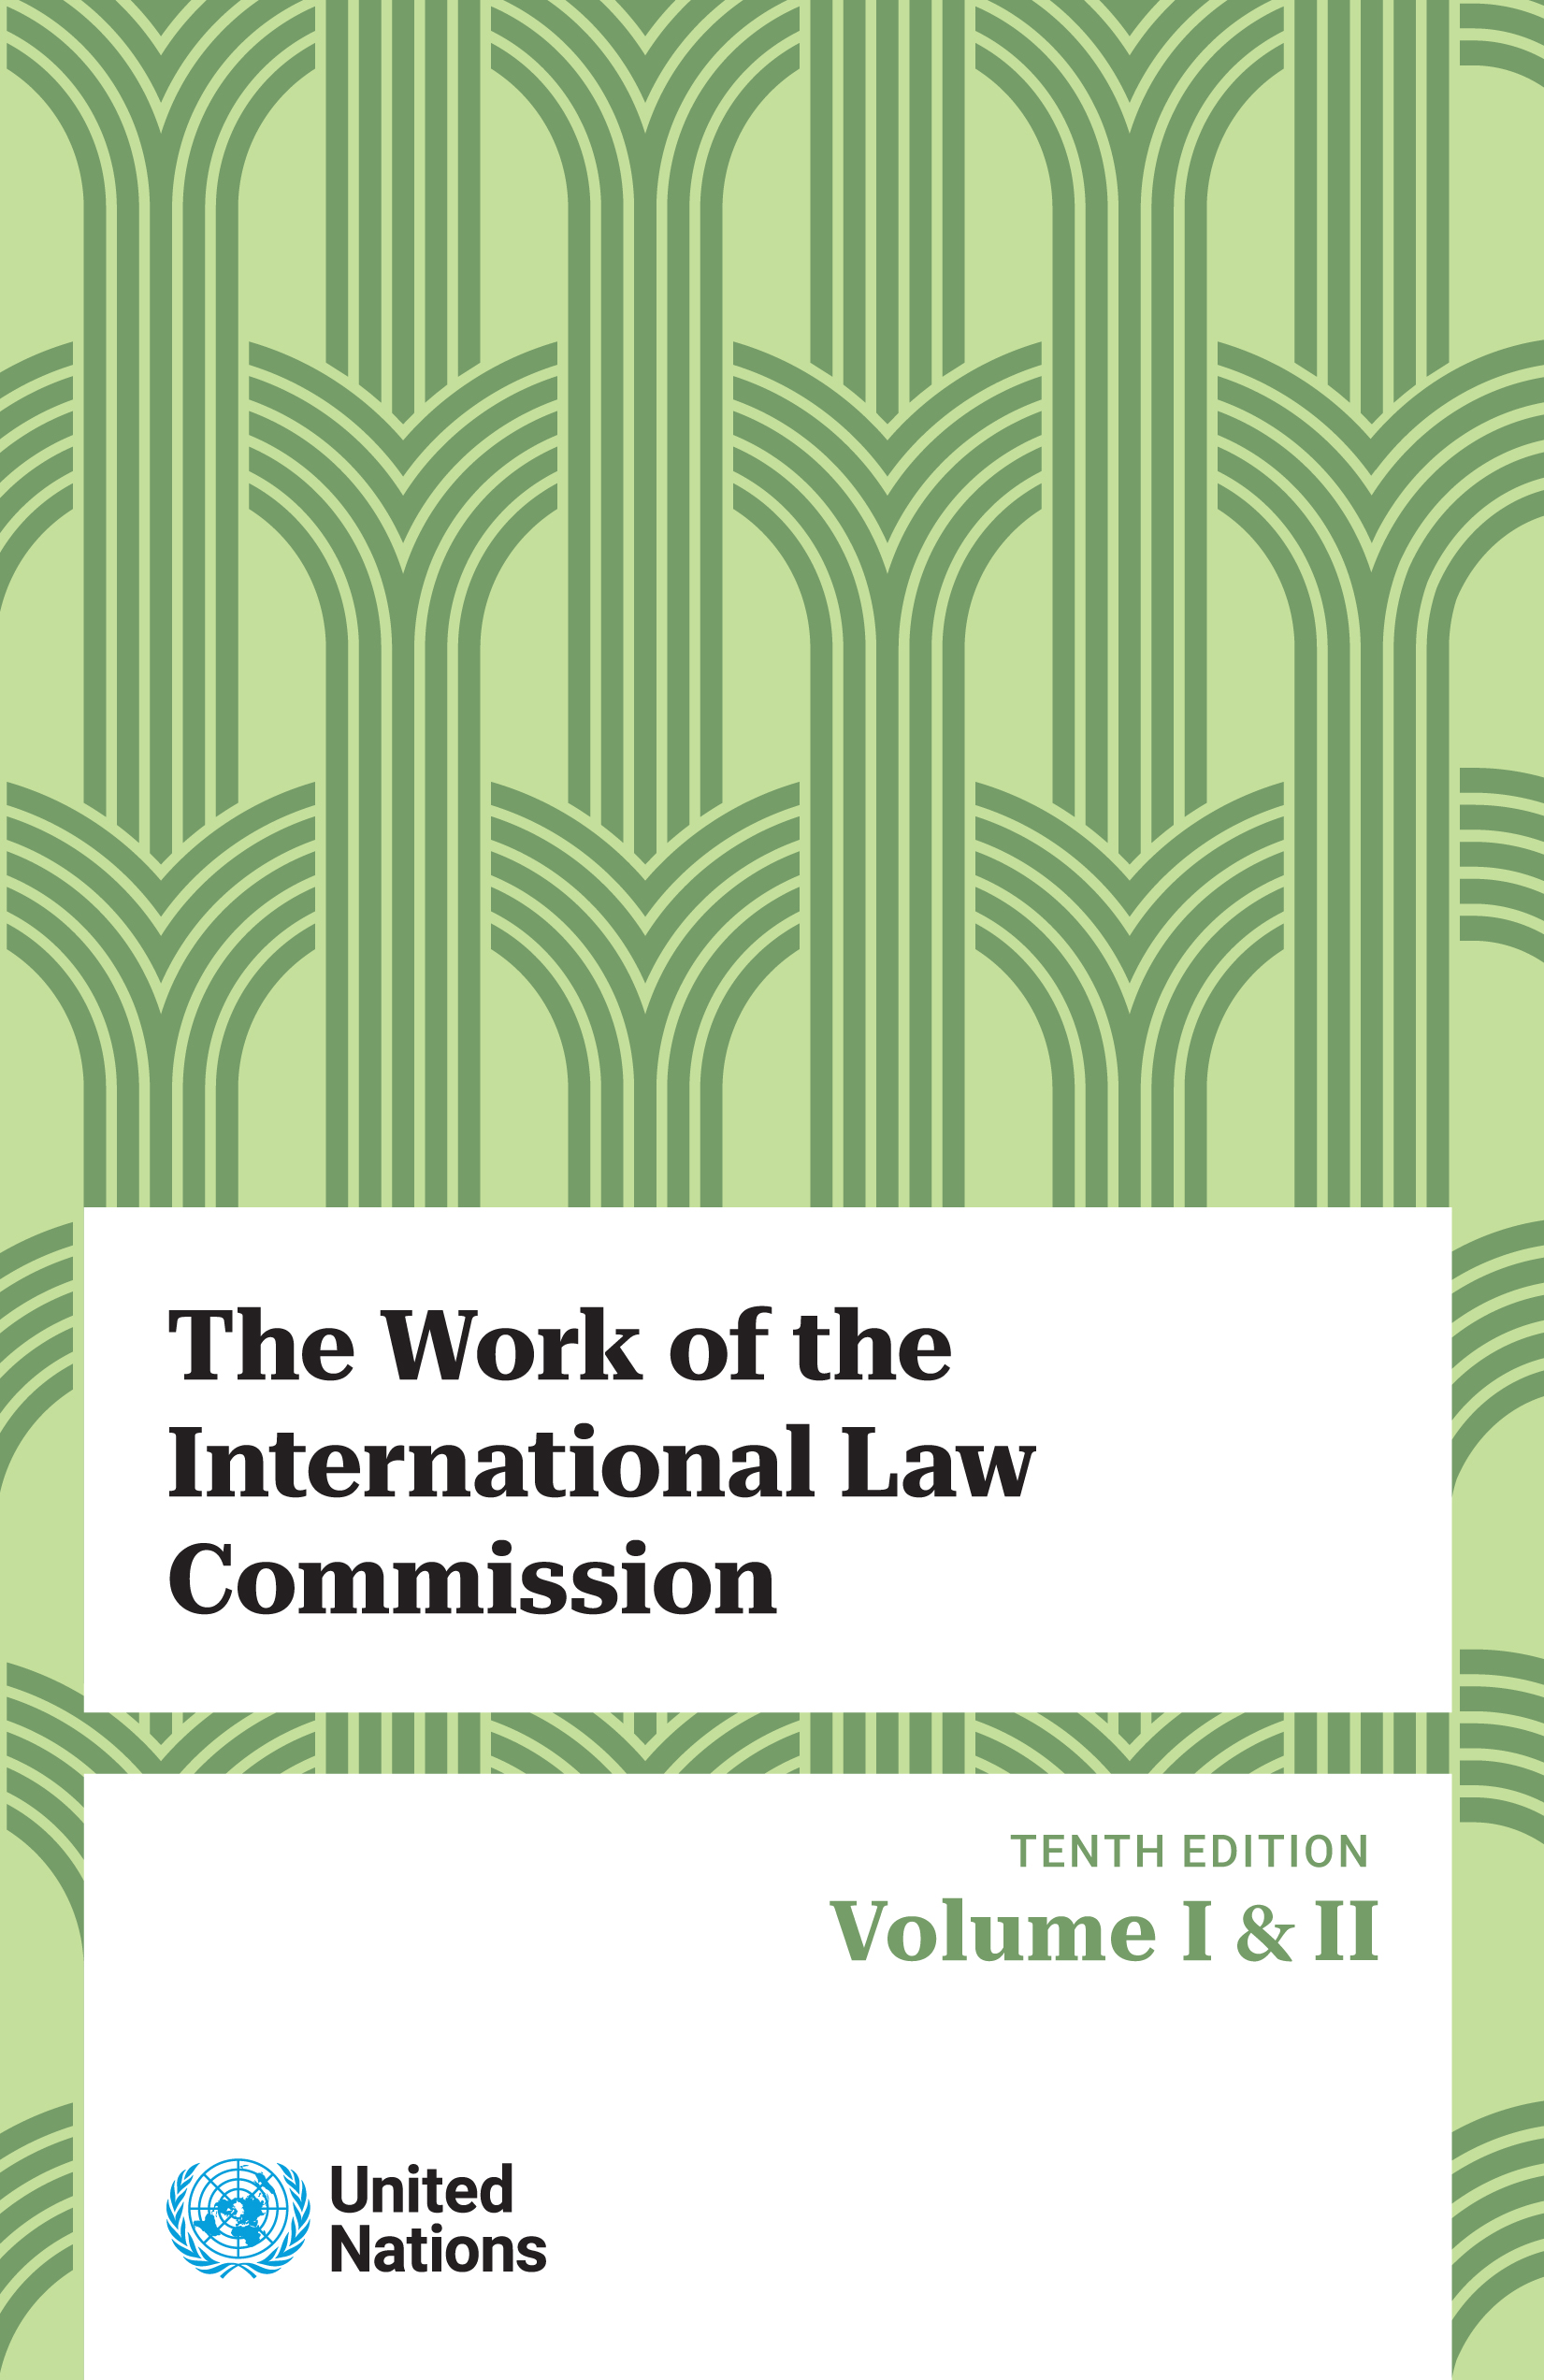 image of The Work of the International Law Commission: Tenth Edition